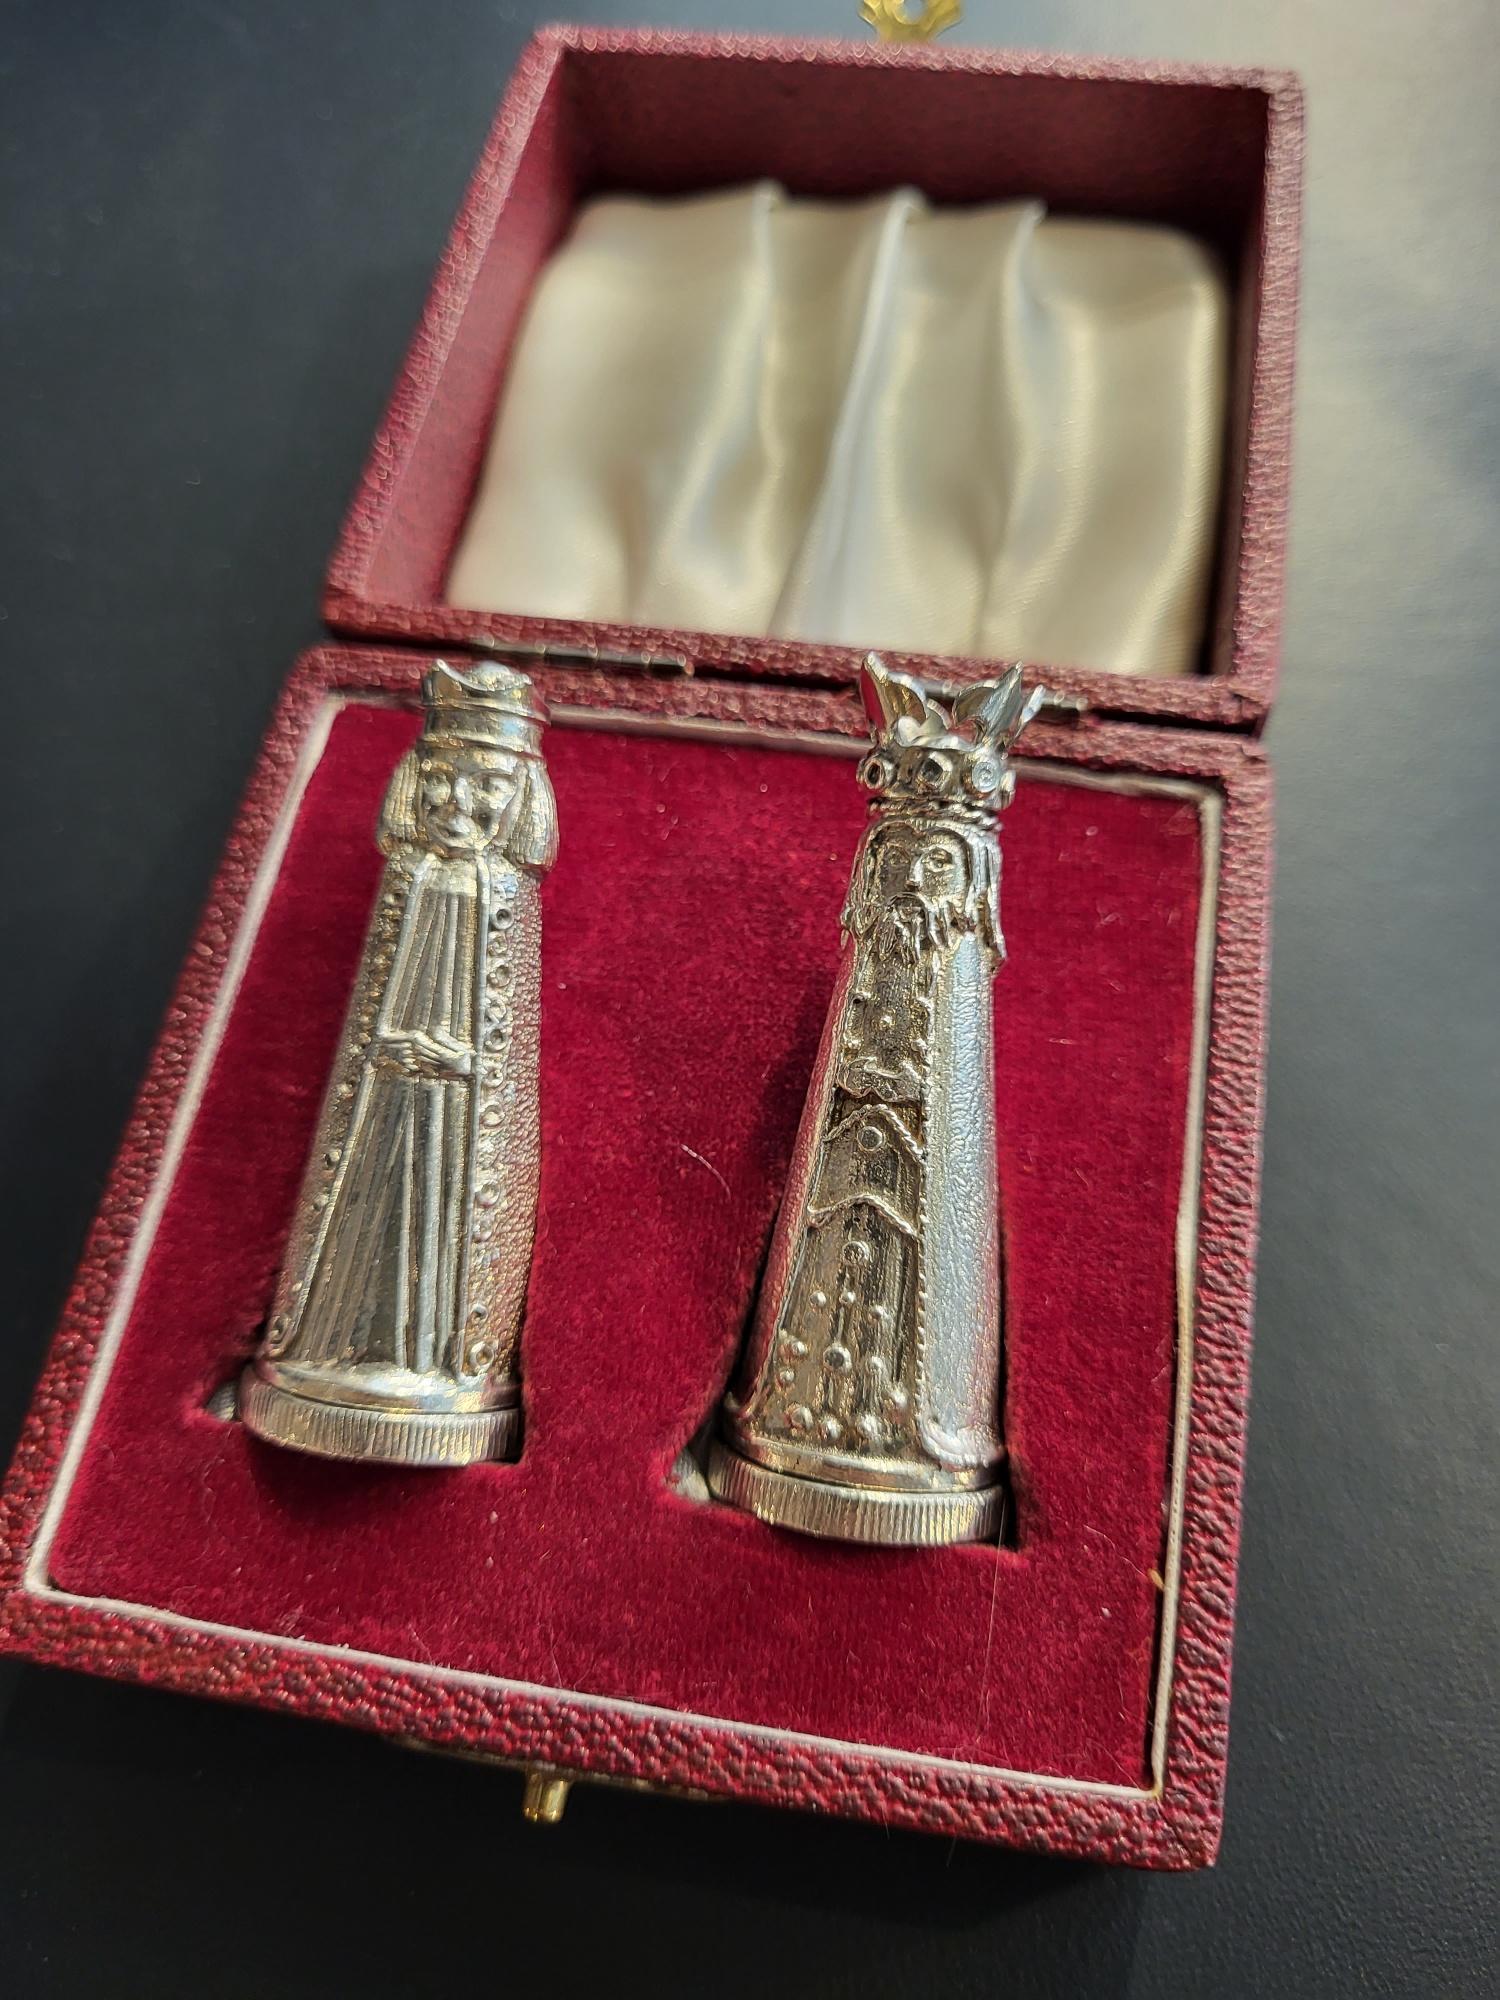 A characterful pair of extremely heavy-cast Sterling silver salt and pepper pots in the form of a King (salt) and his Queen (pepper), each character is wearing a long cloak, embellished with cast ‘jewels’ and fancy trim, the King with detailed